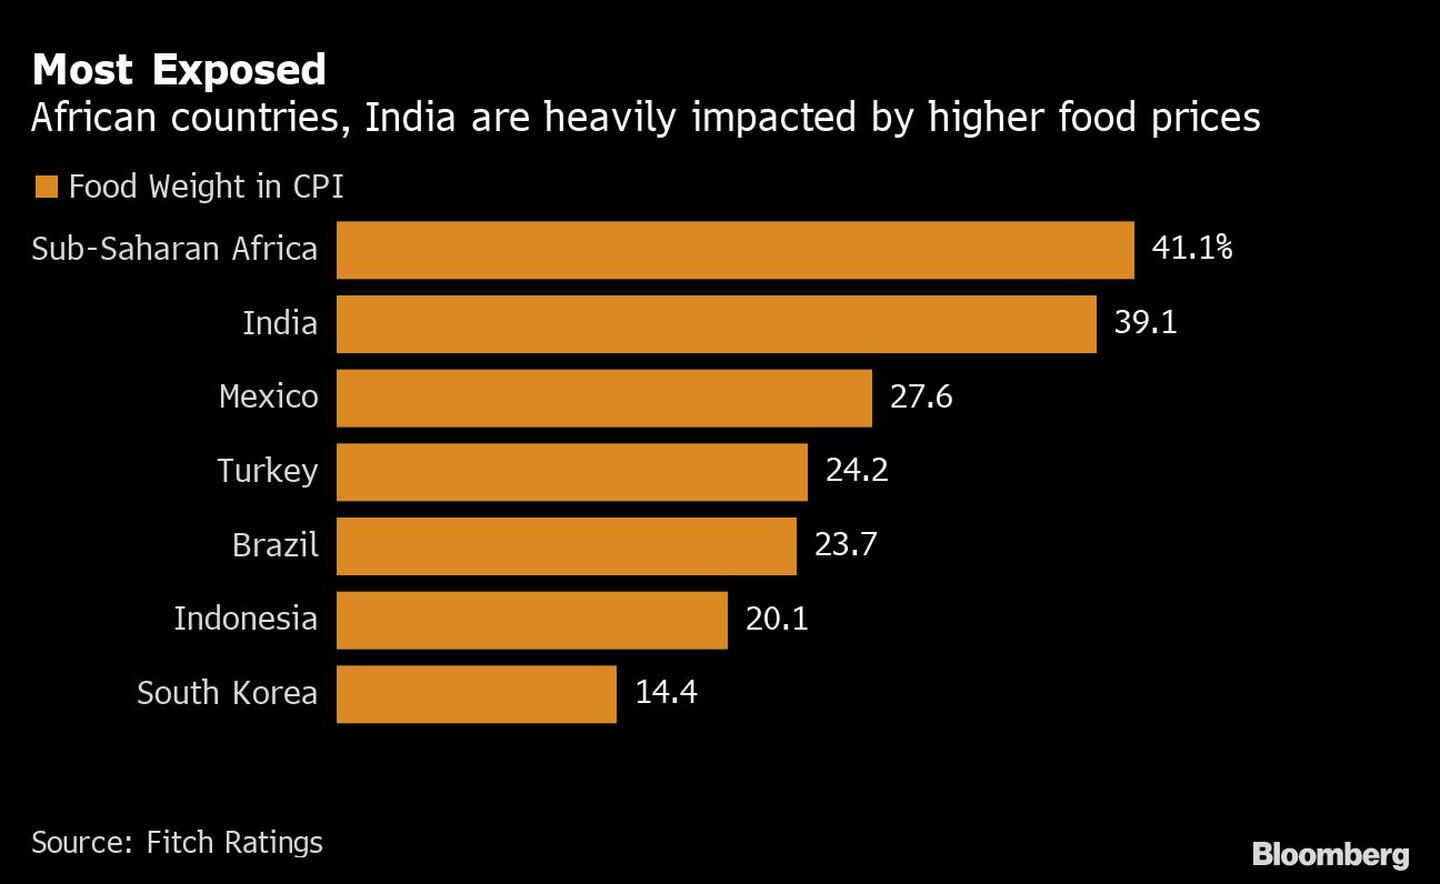 Most Exposed | African countries, India are heavily impacted by higher food pricesdfd